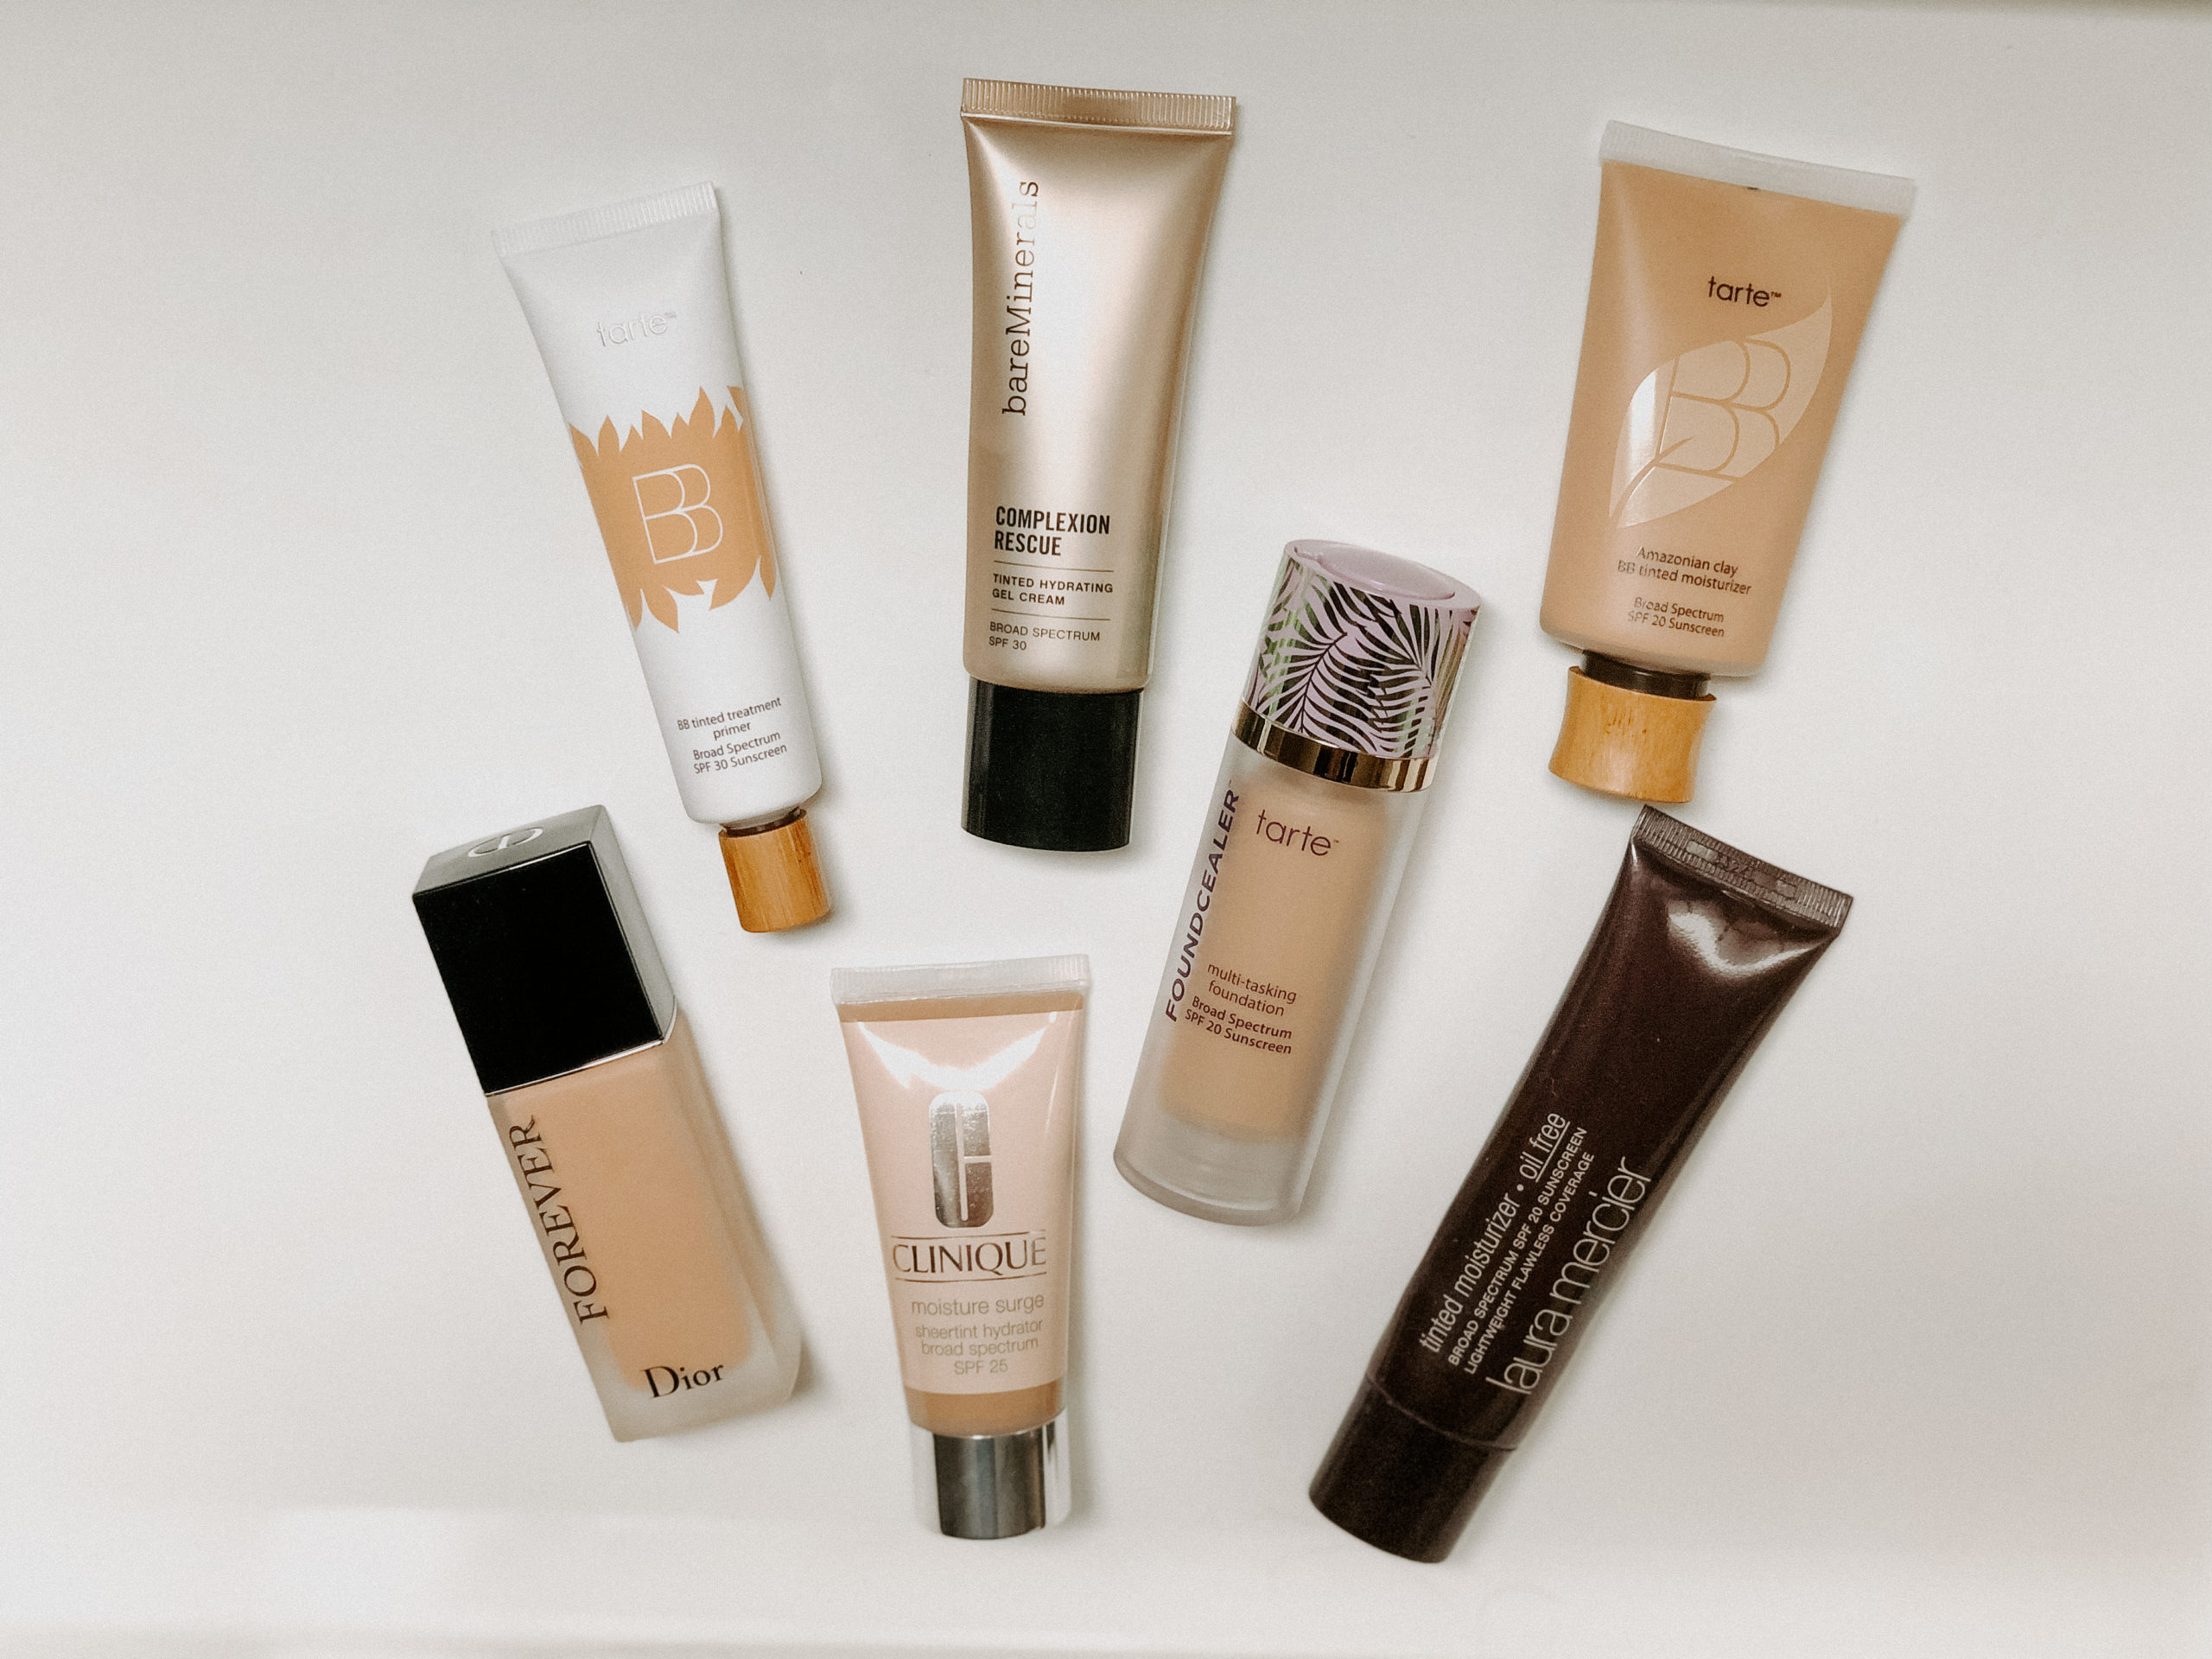 7 SPF Foundation Product Review